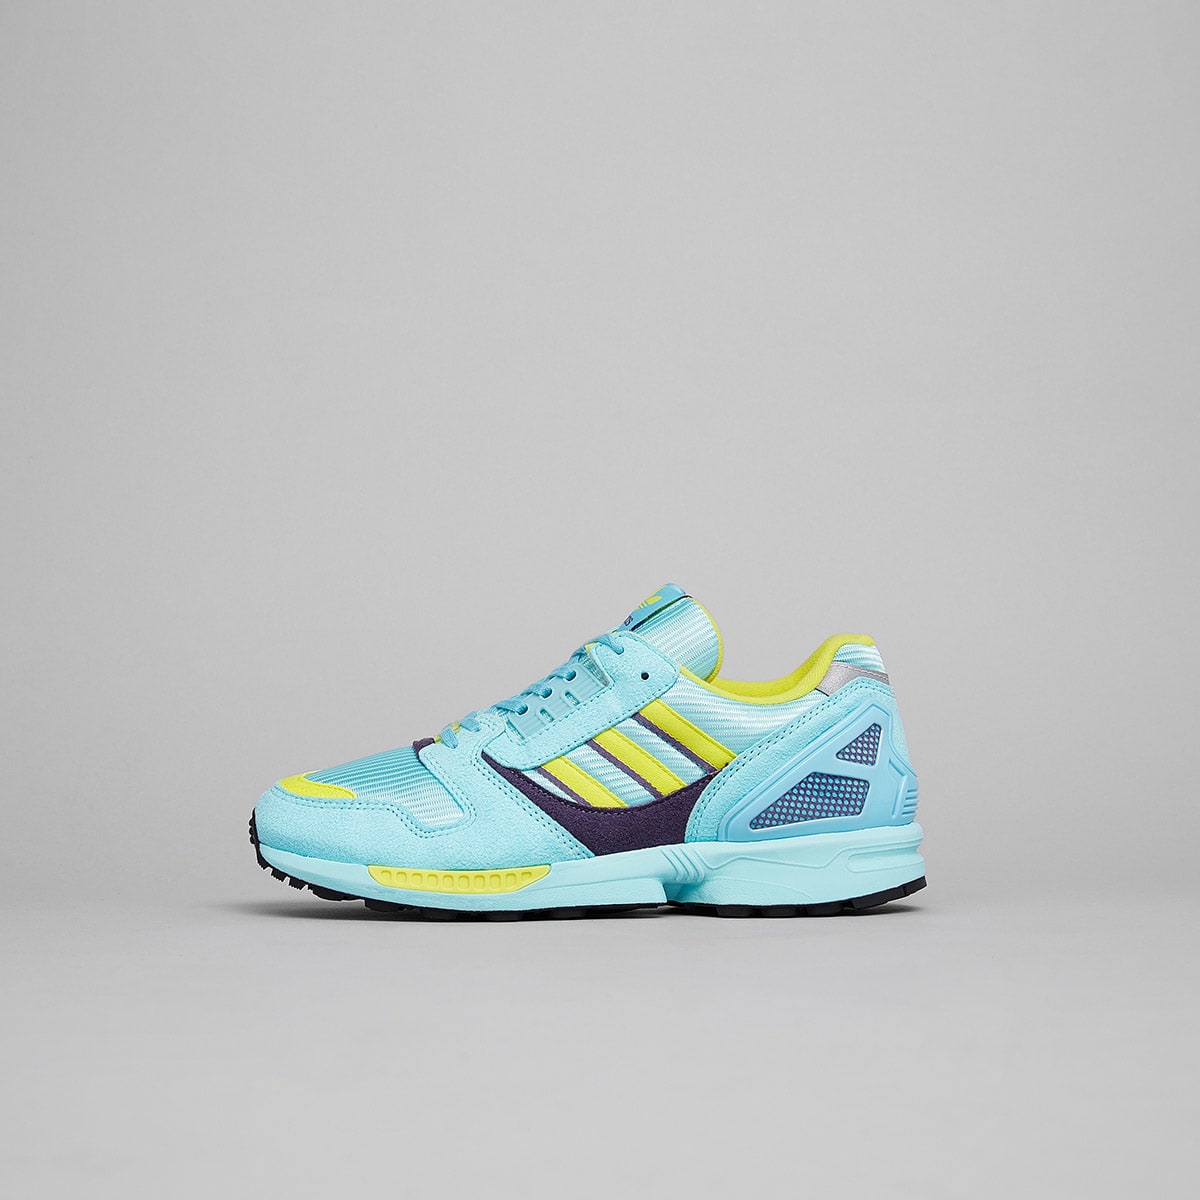 Adidas ZX 8000 OG (Aqua & Yellow) | END. Launches